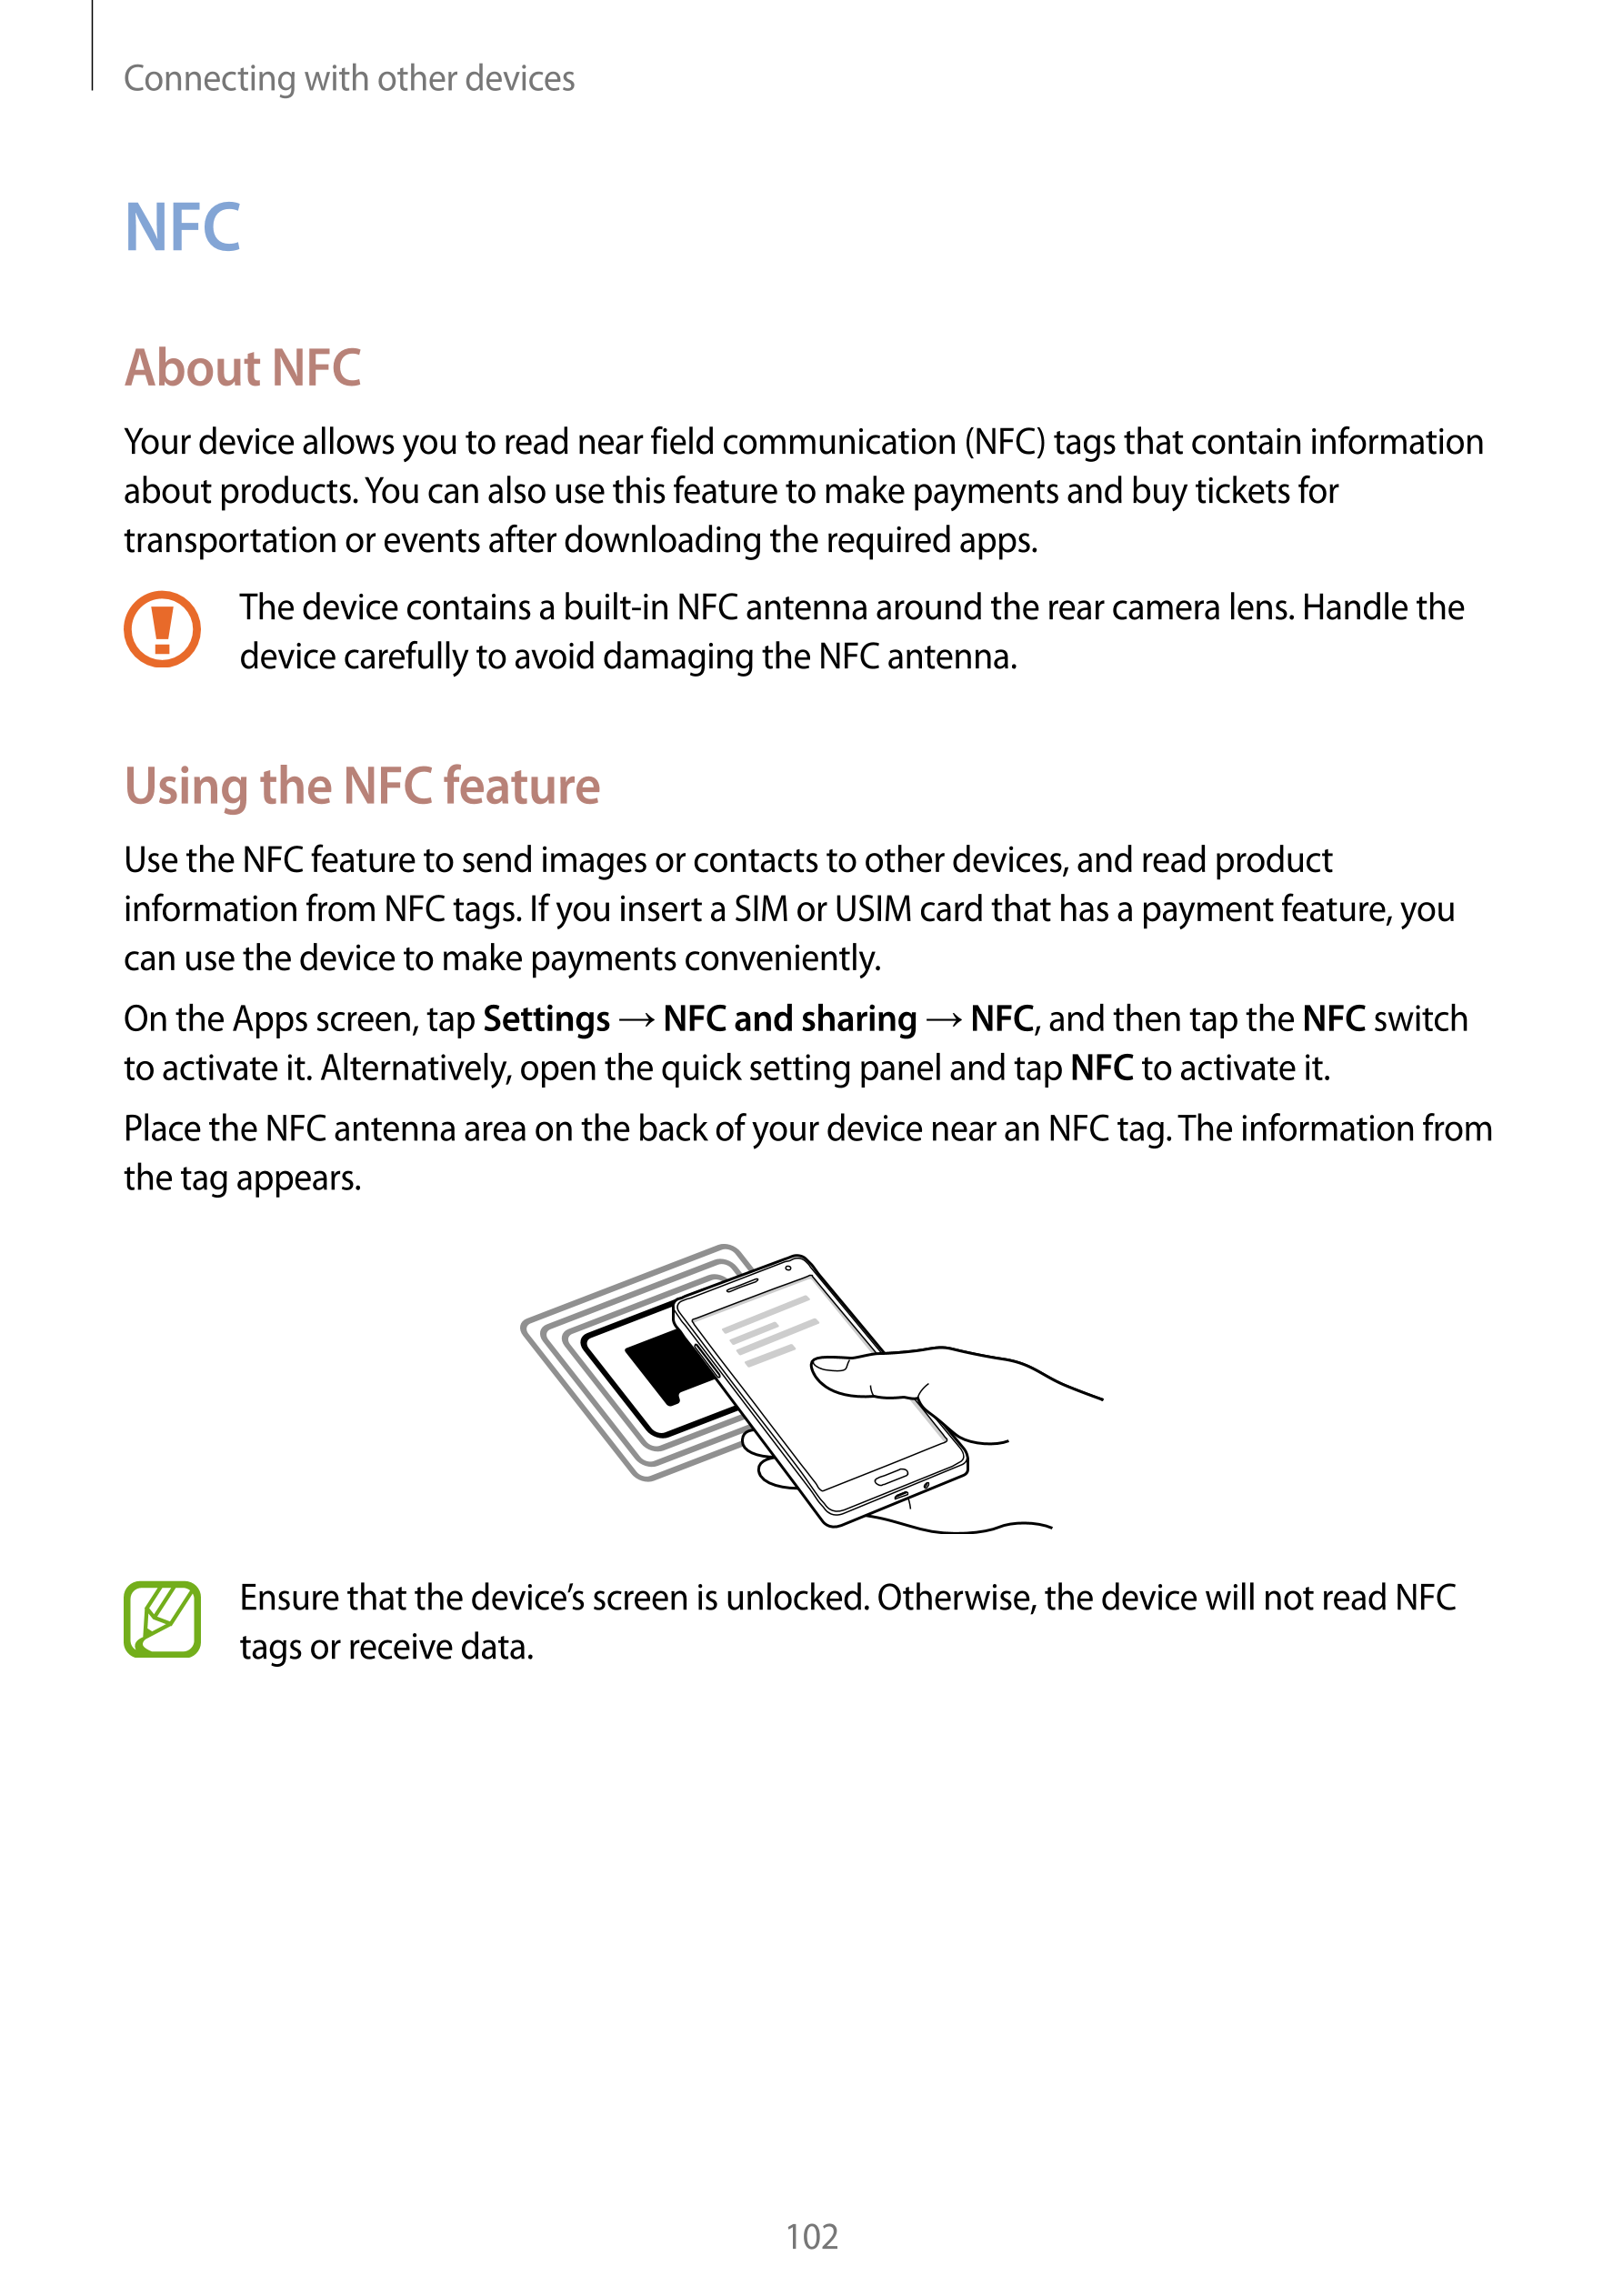 Connecting with other devices
NFC
About NFC
Your device allows you to read near field communication (NFC) tags that contain info